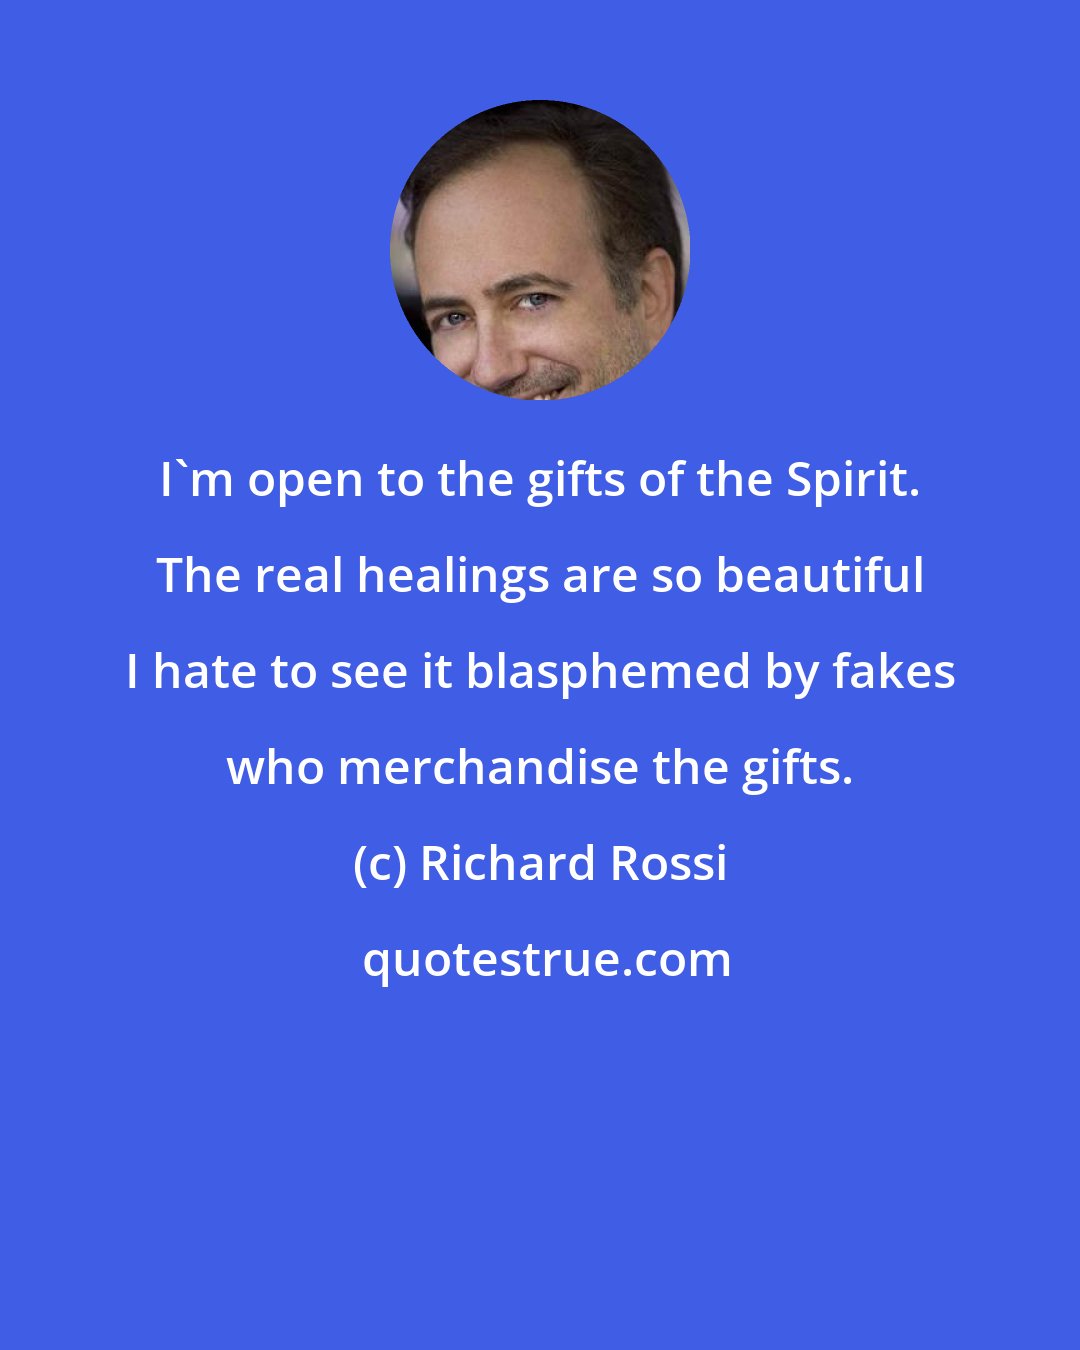 Richard Rossi: I'm open to the gifts of the Spirit. The real healings are so beautiful I hate to see it blasphemed by fakes who merchandise the gifts.